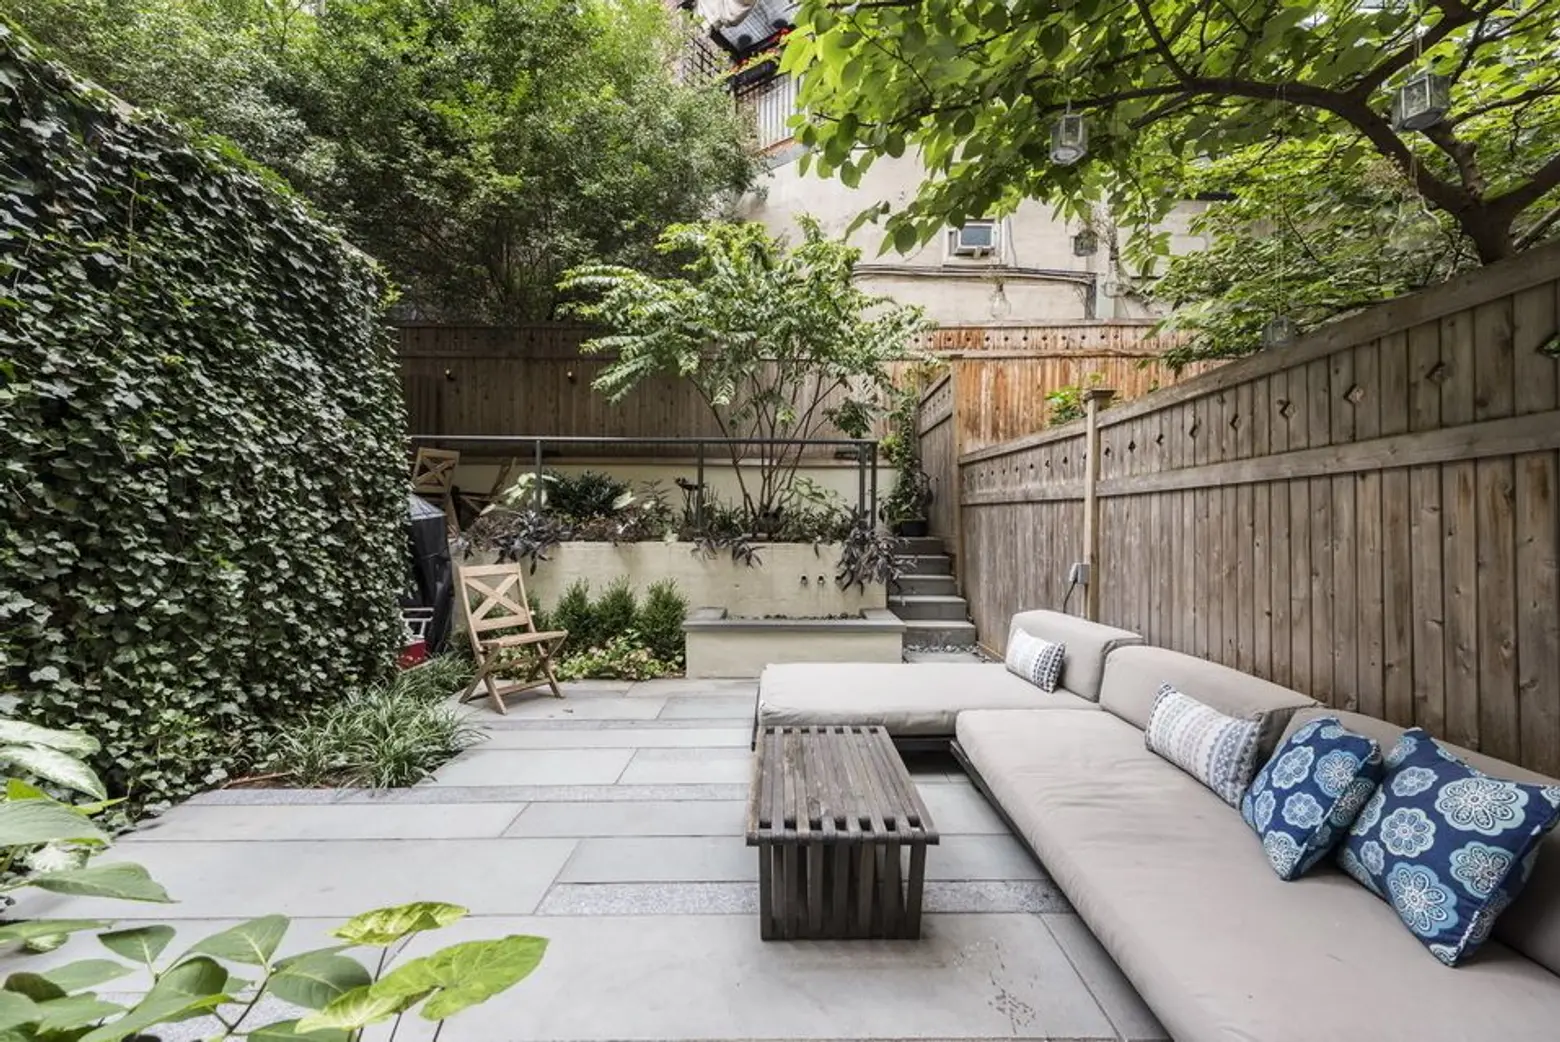 407 East 12th Street, cool listings, east village, solarium, outdoor spaces